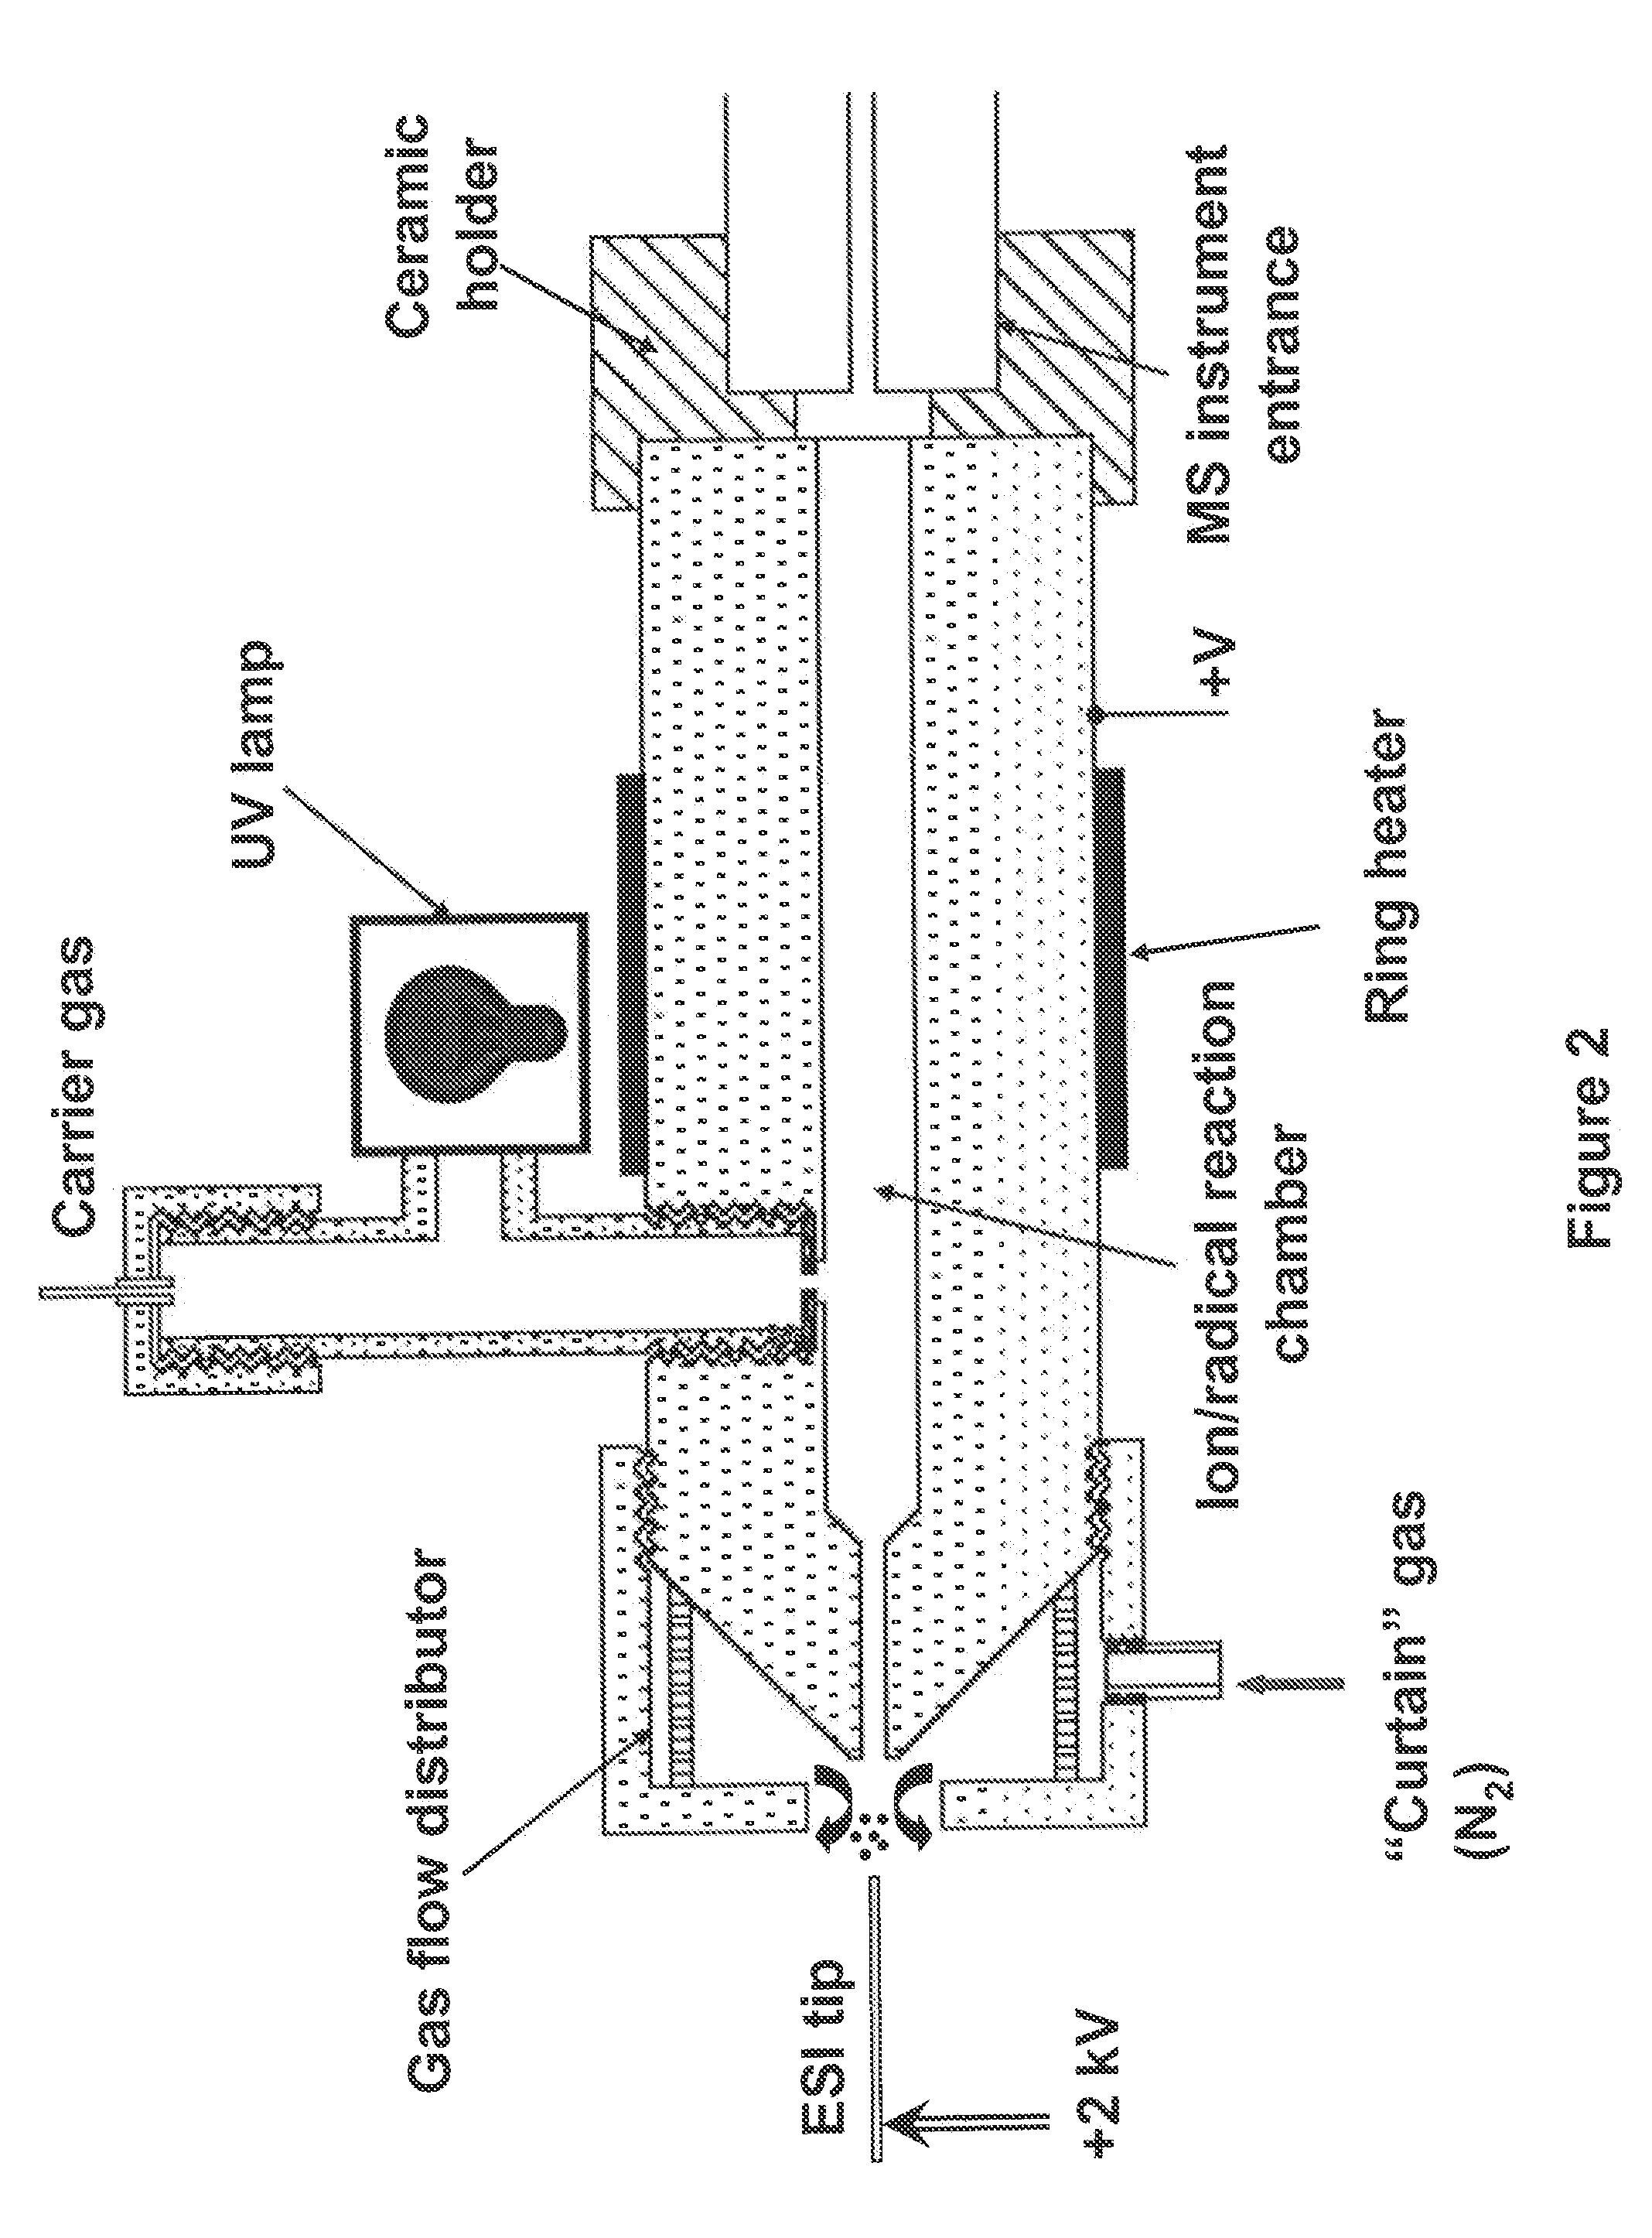 Method and apparatus for ion fragmentation in mass spectrometry